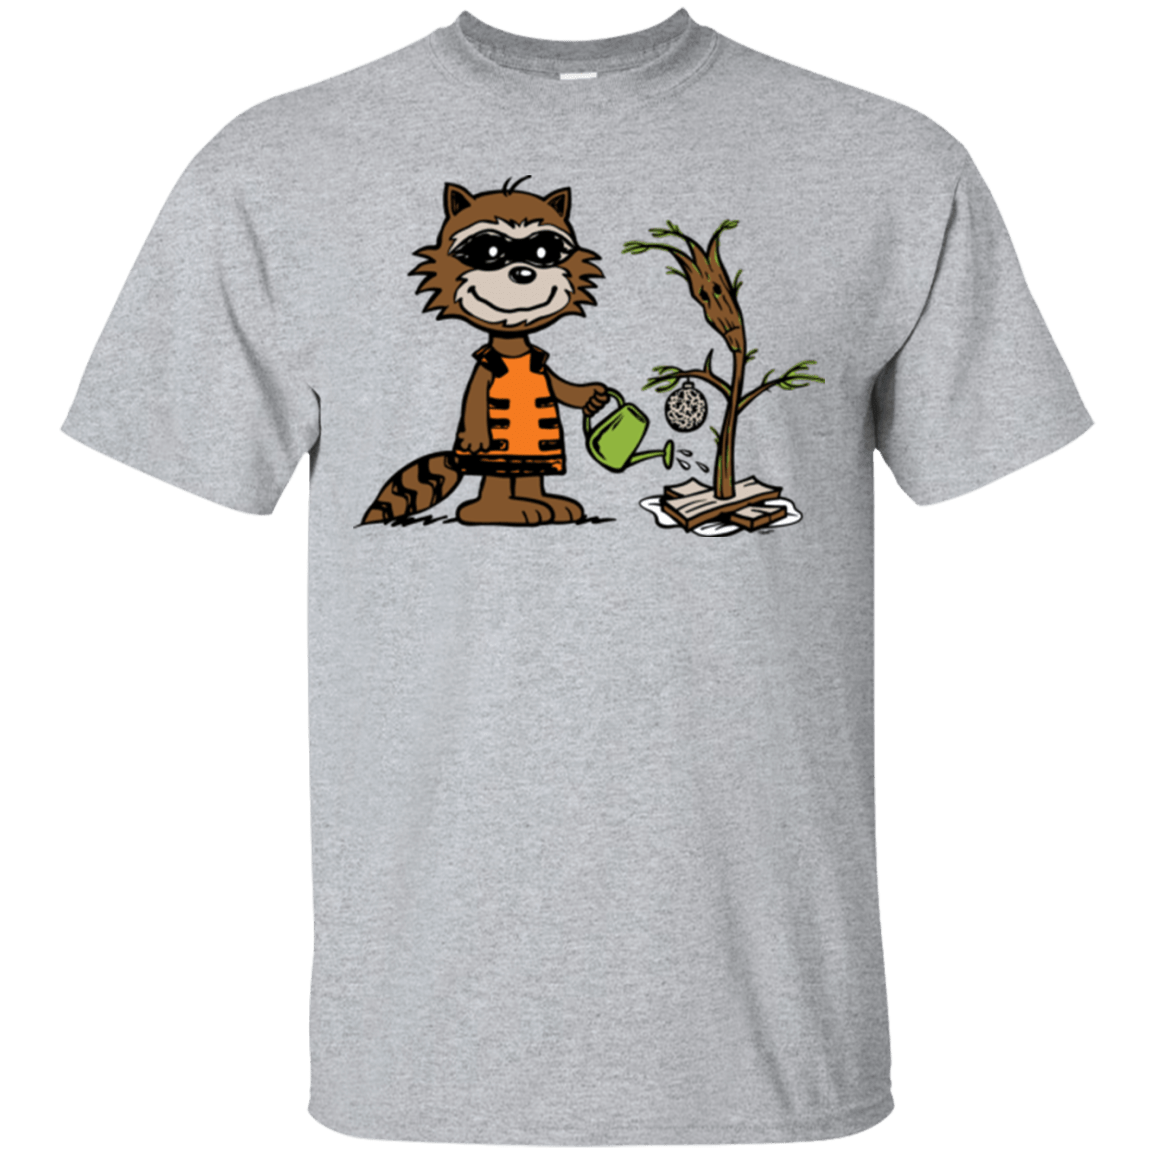 T-Shirts Sport Grey / Small Groot Grief T-Shirt